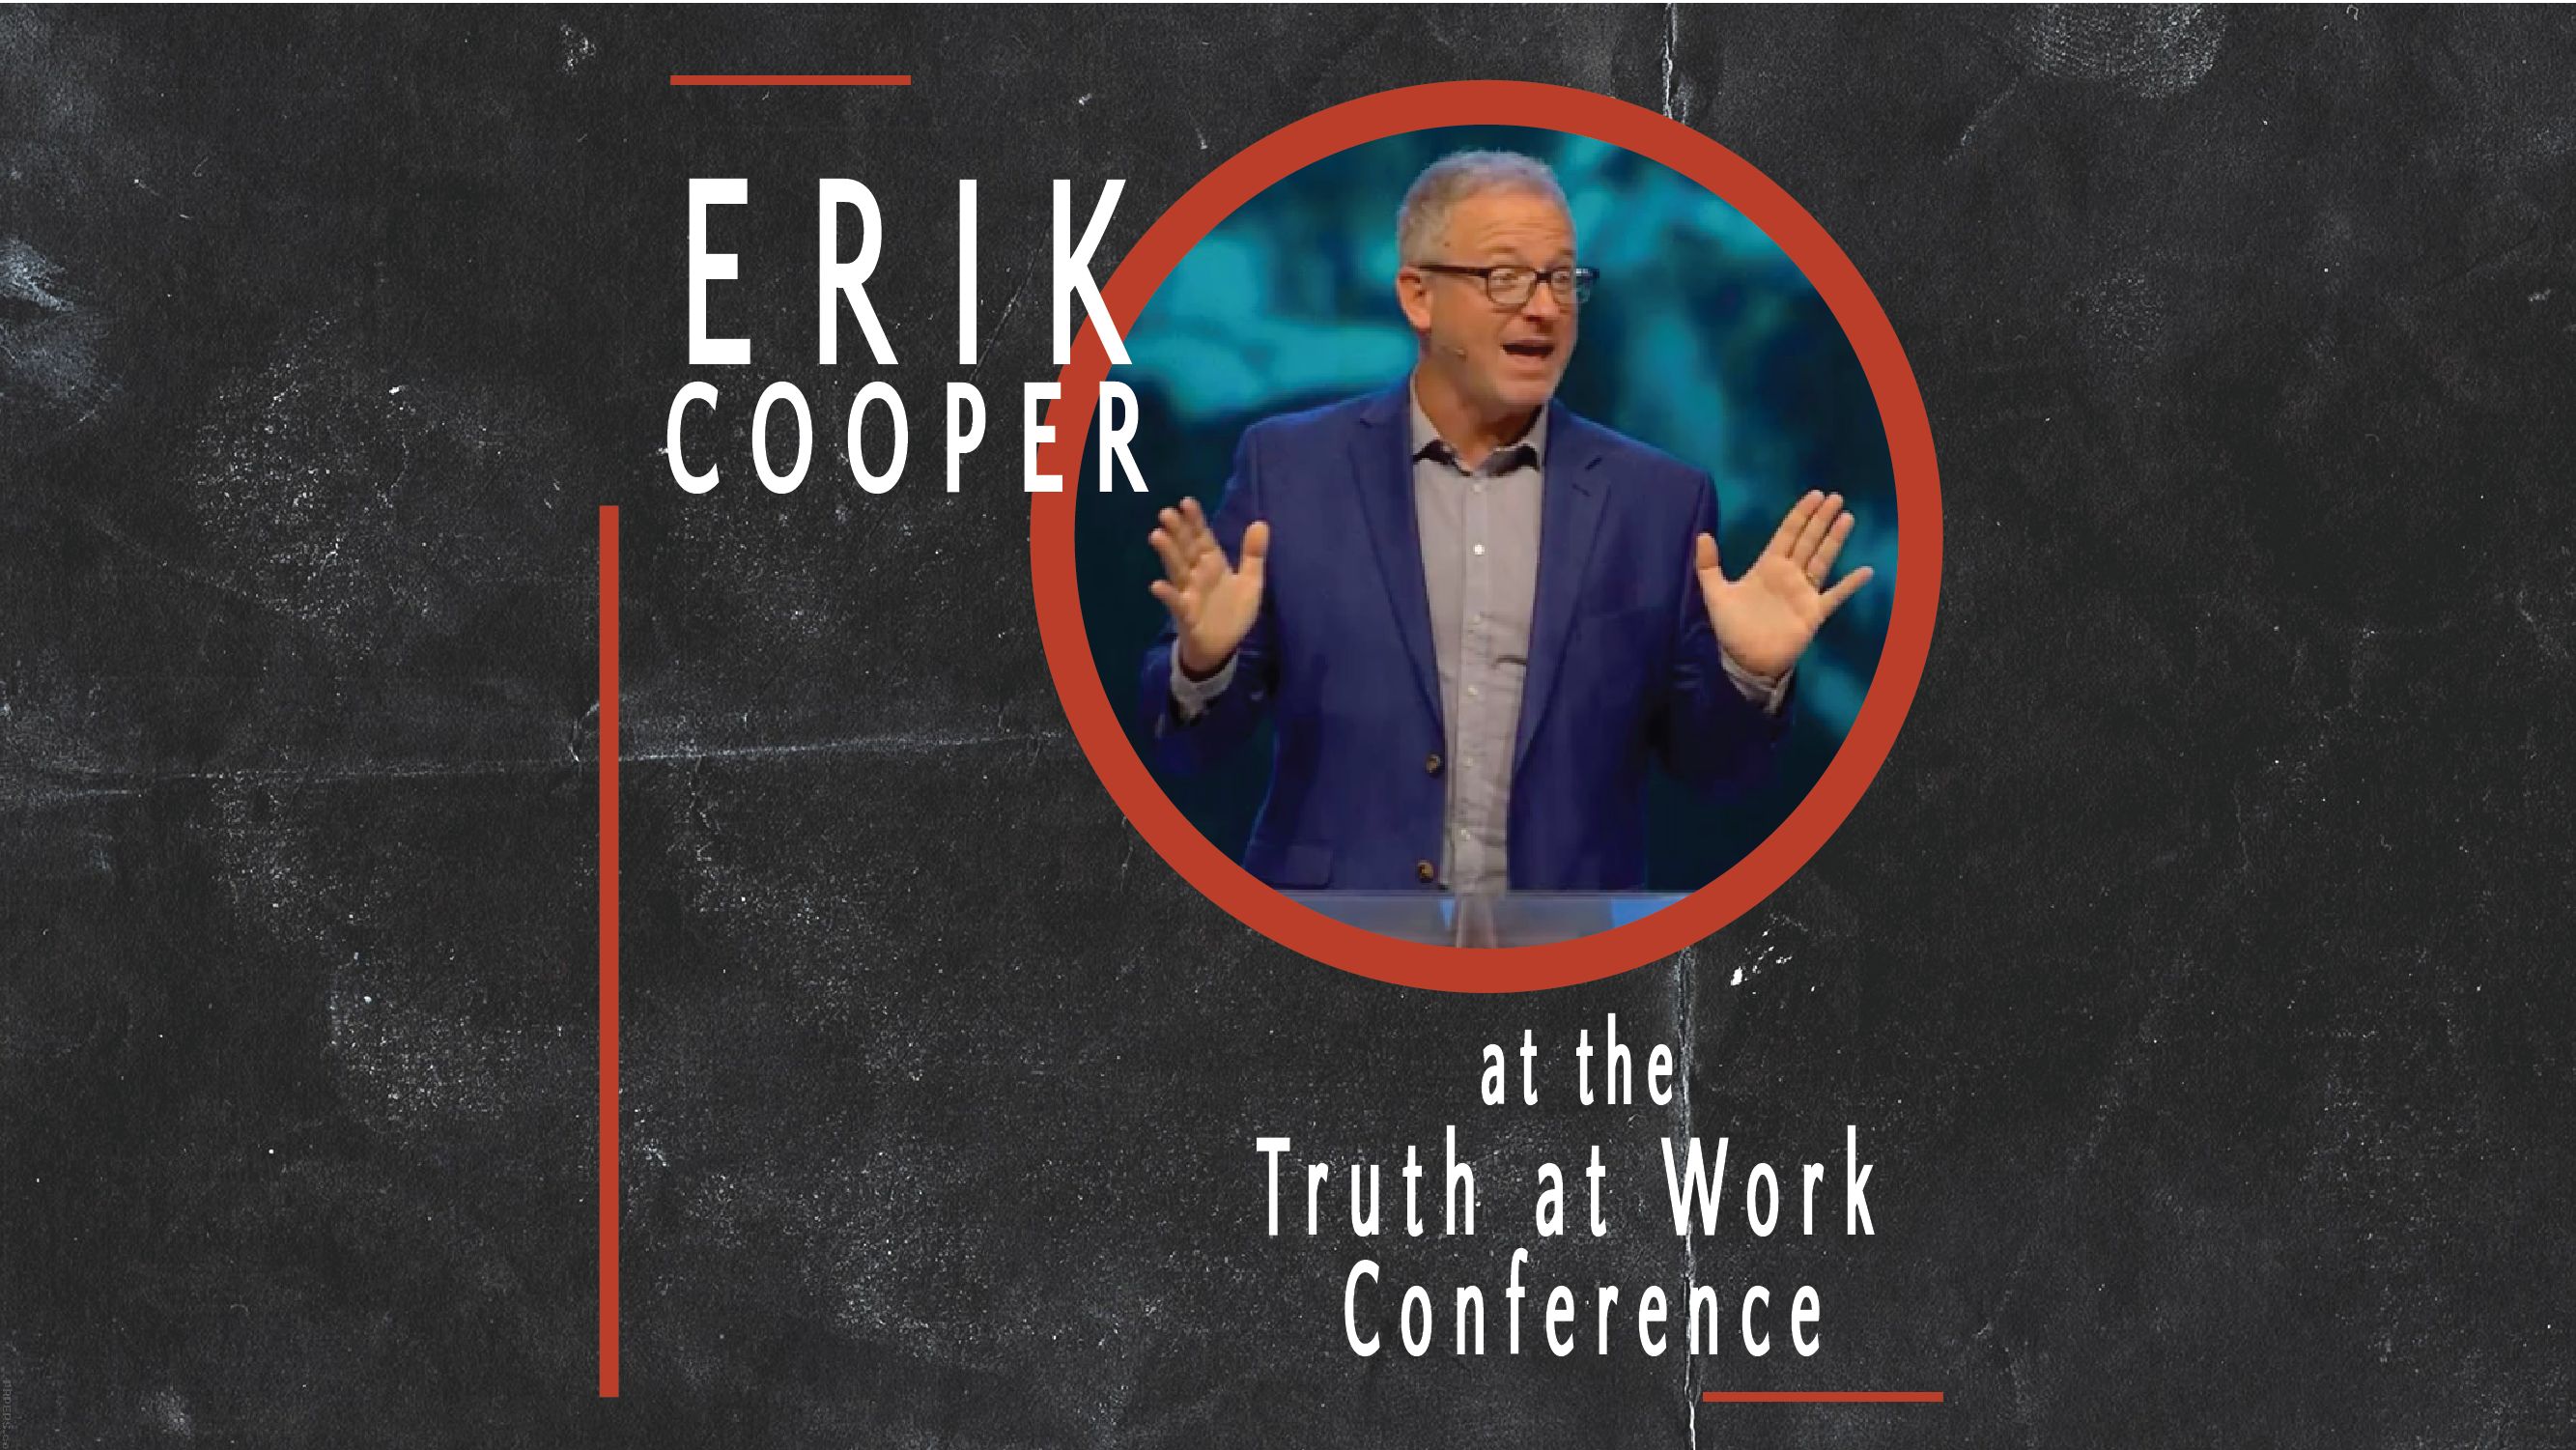 VIDEO: Erik Cooper at the Truth at Work Conference!